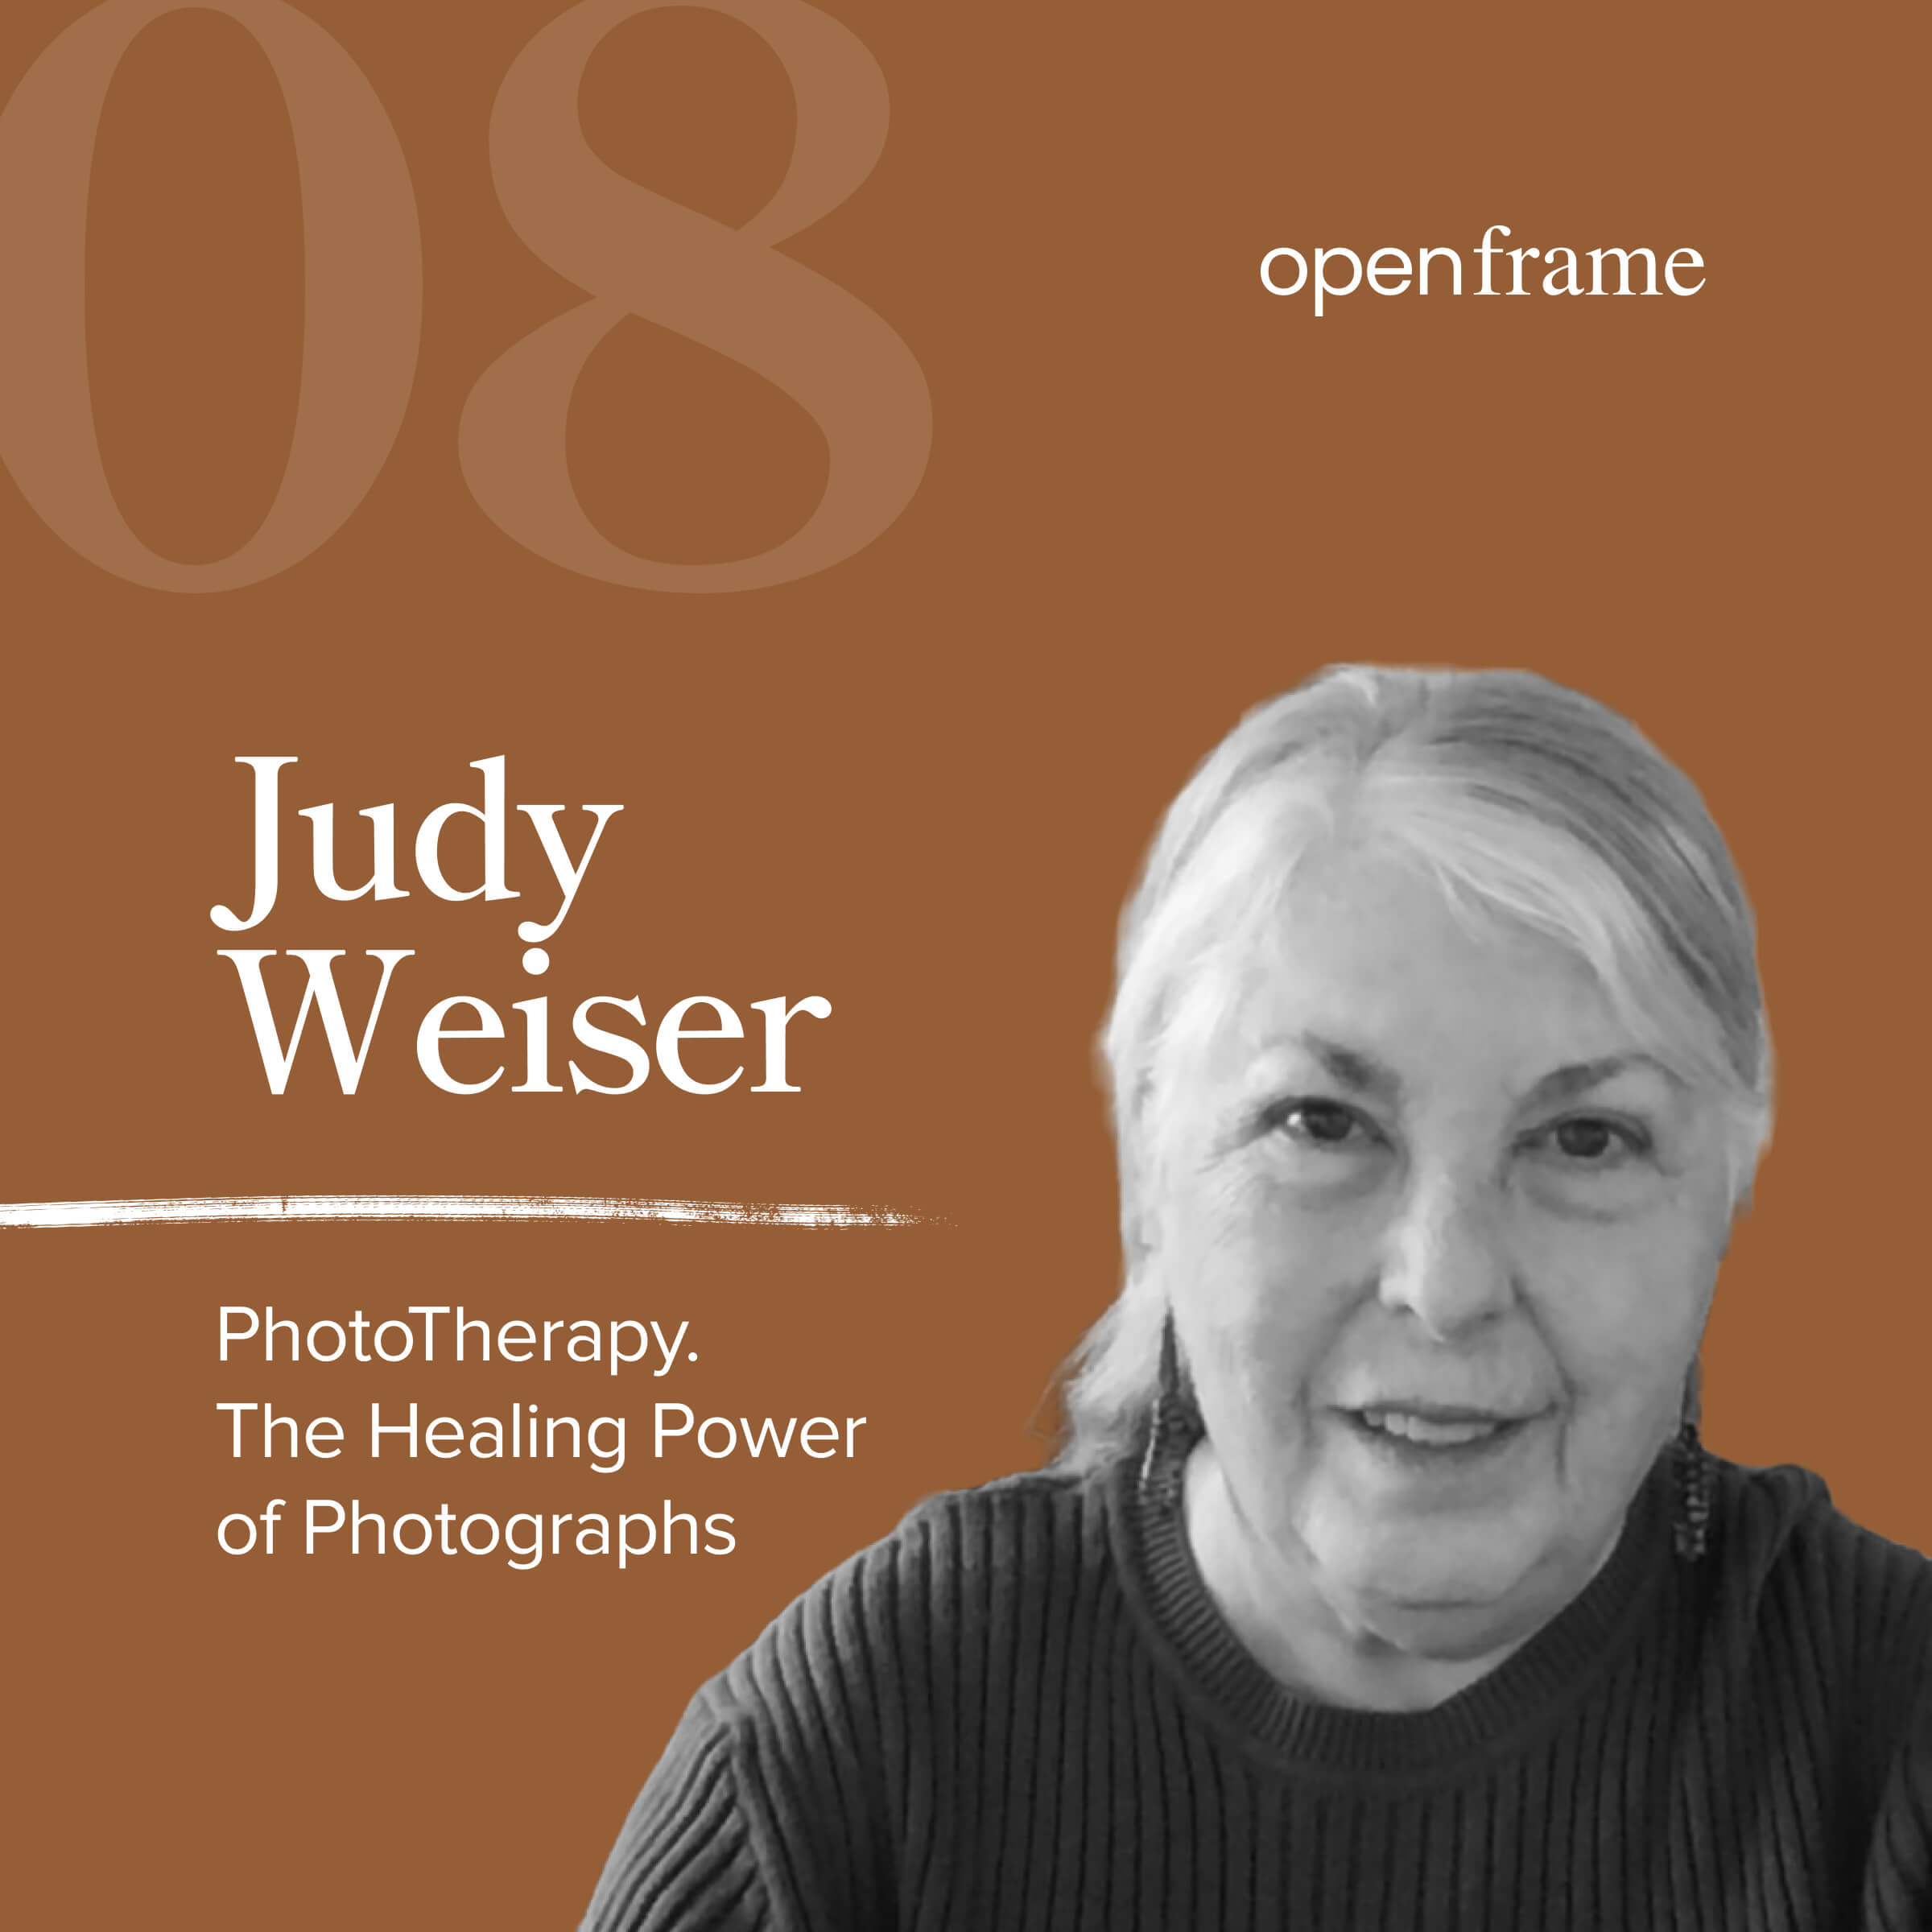 Judy-Weiser-portrait podcast interview OpenFrame - PhotoTherapy and Therapeutic Photography episode cover